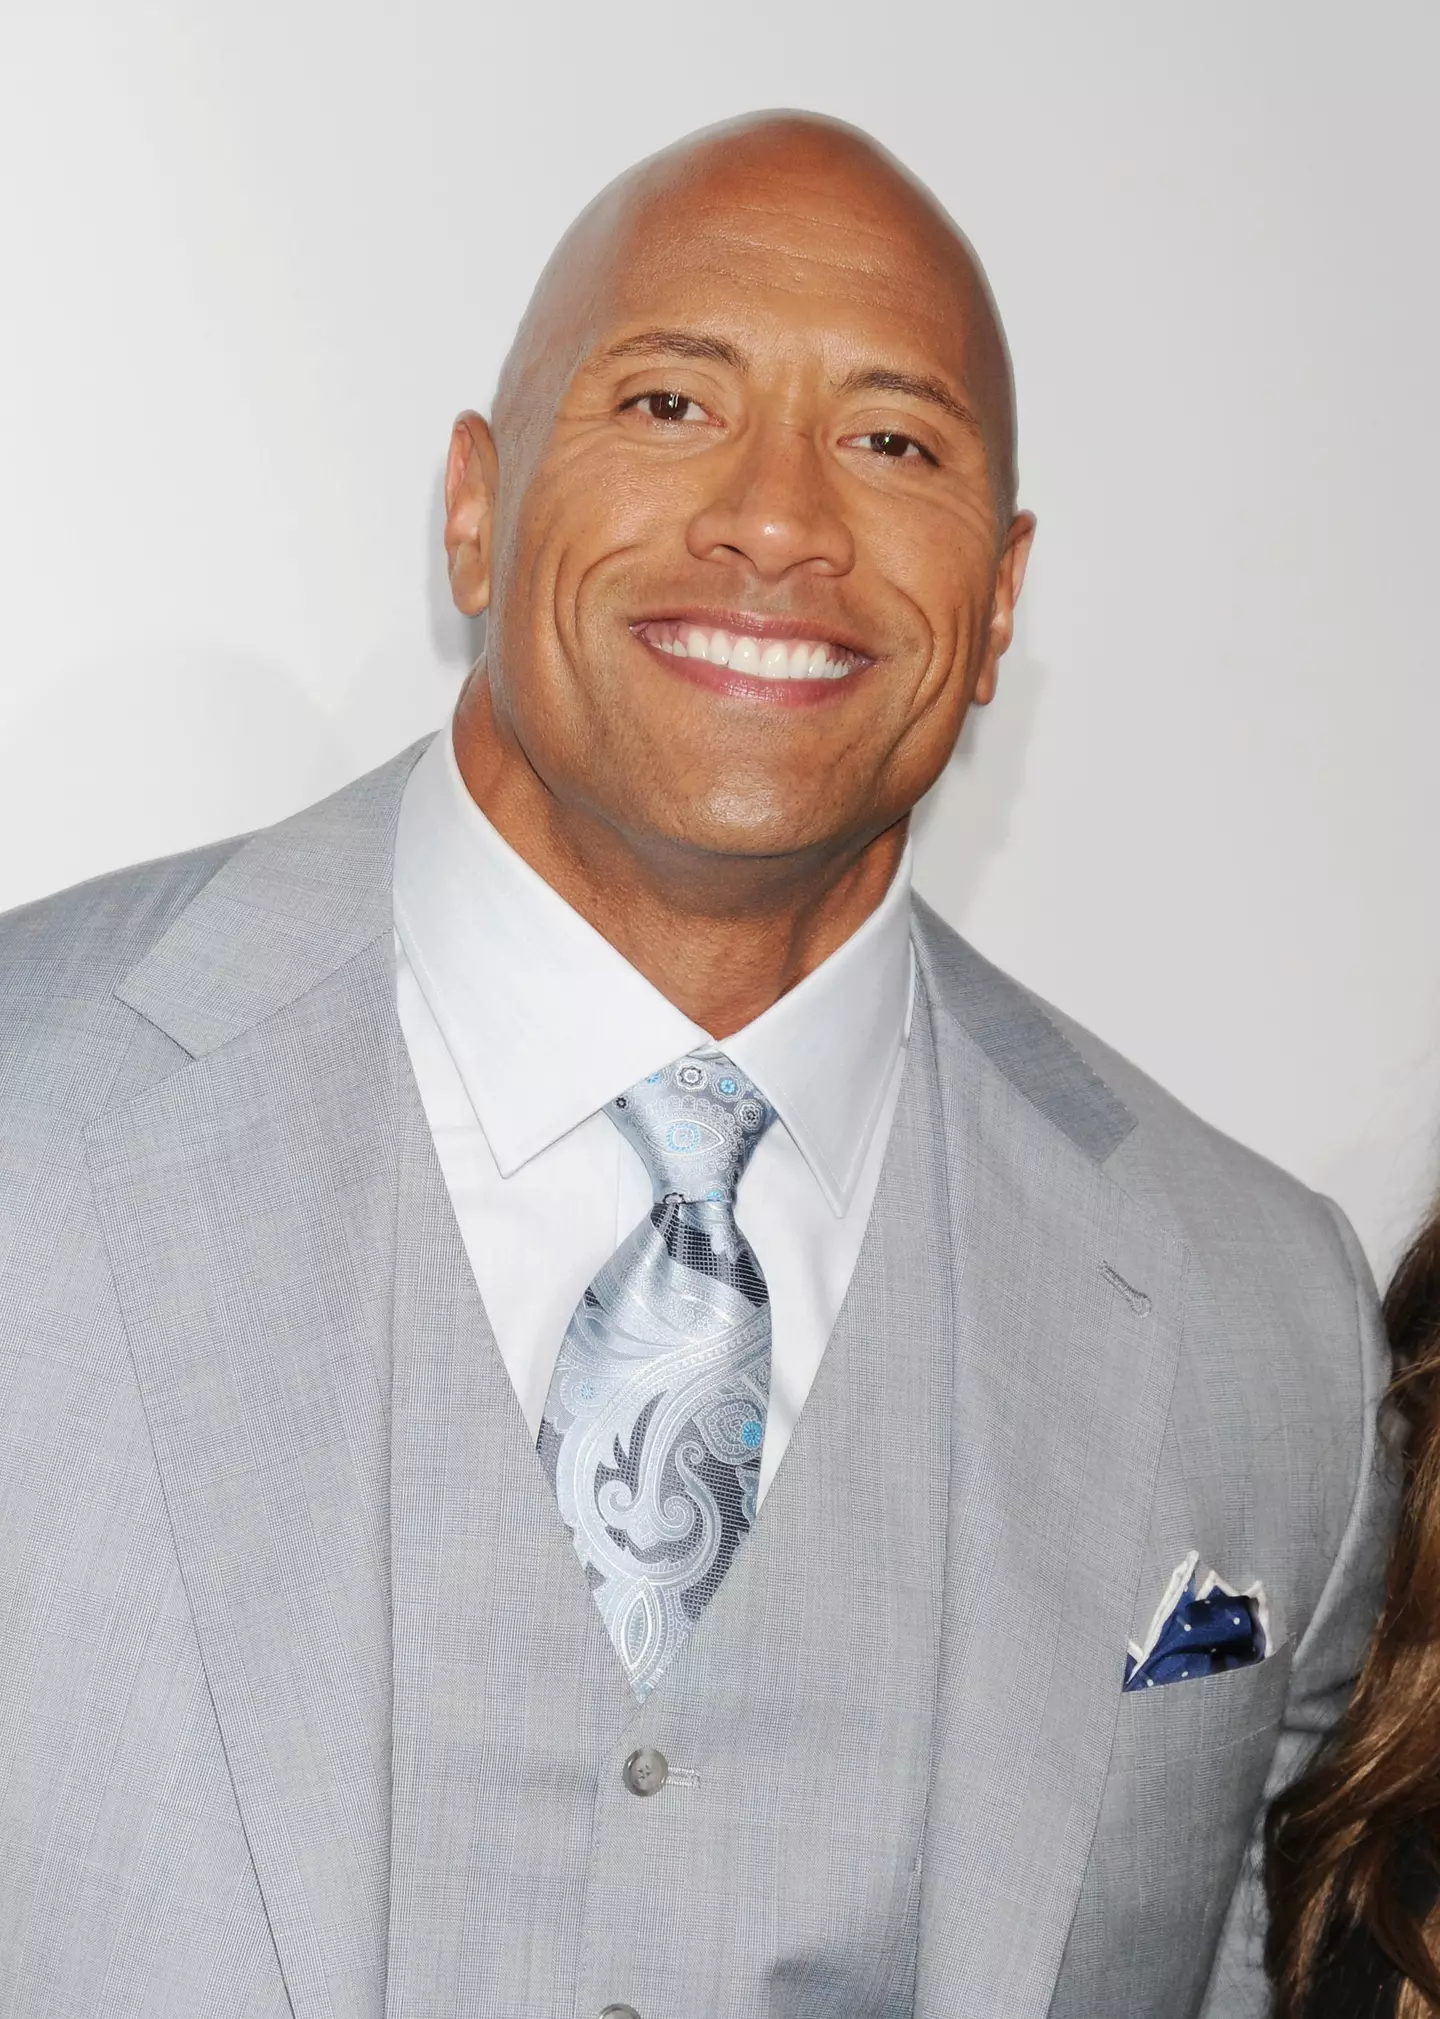 Dwayne ‘The Rock’ Johnson turned 50 today on 2 May.